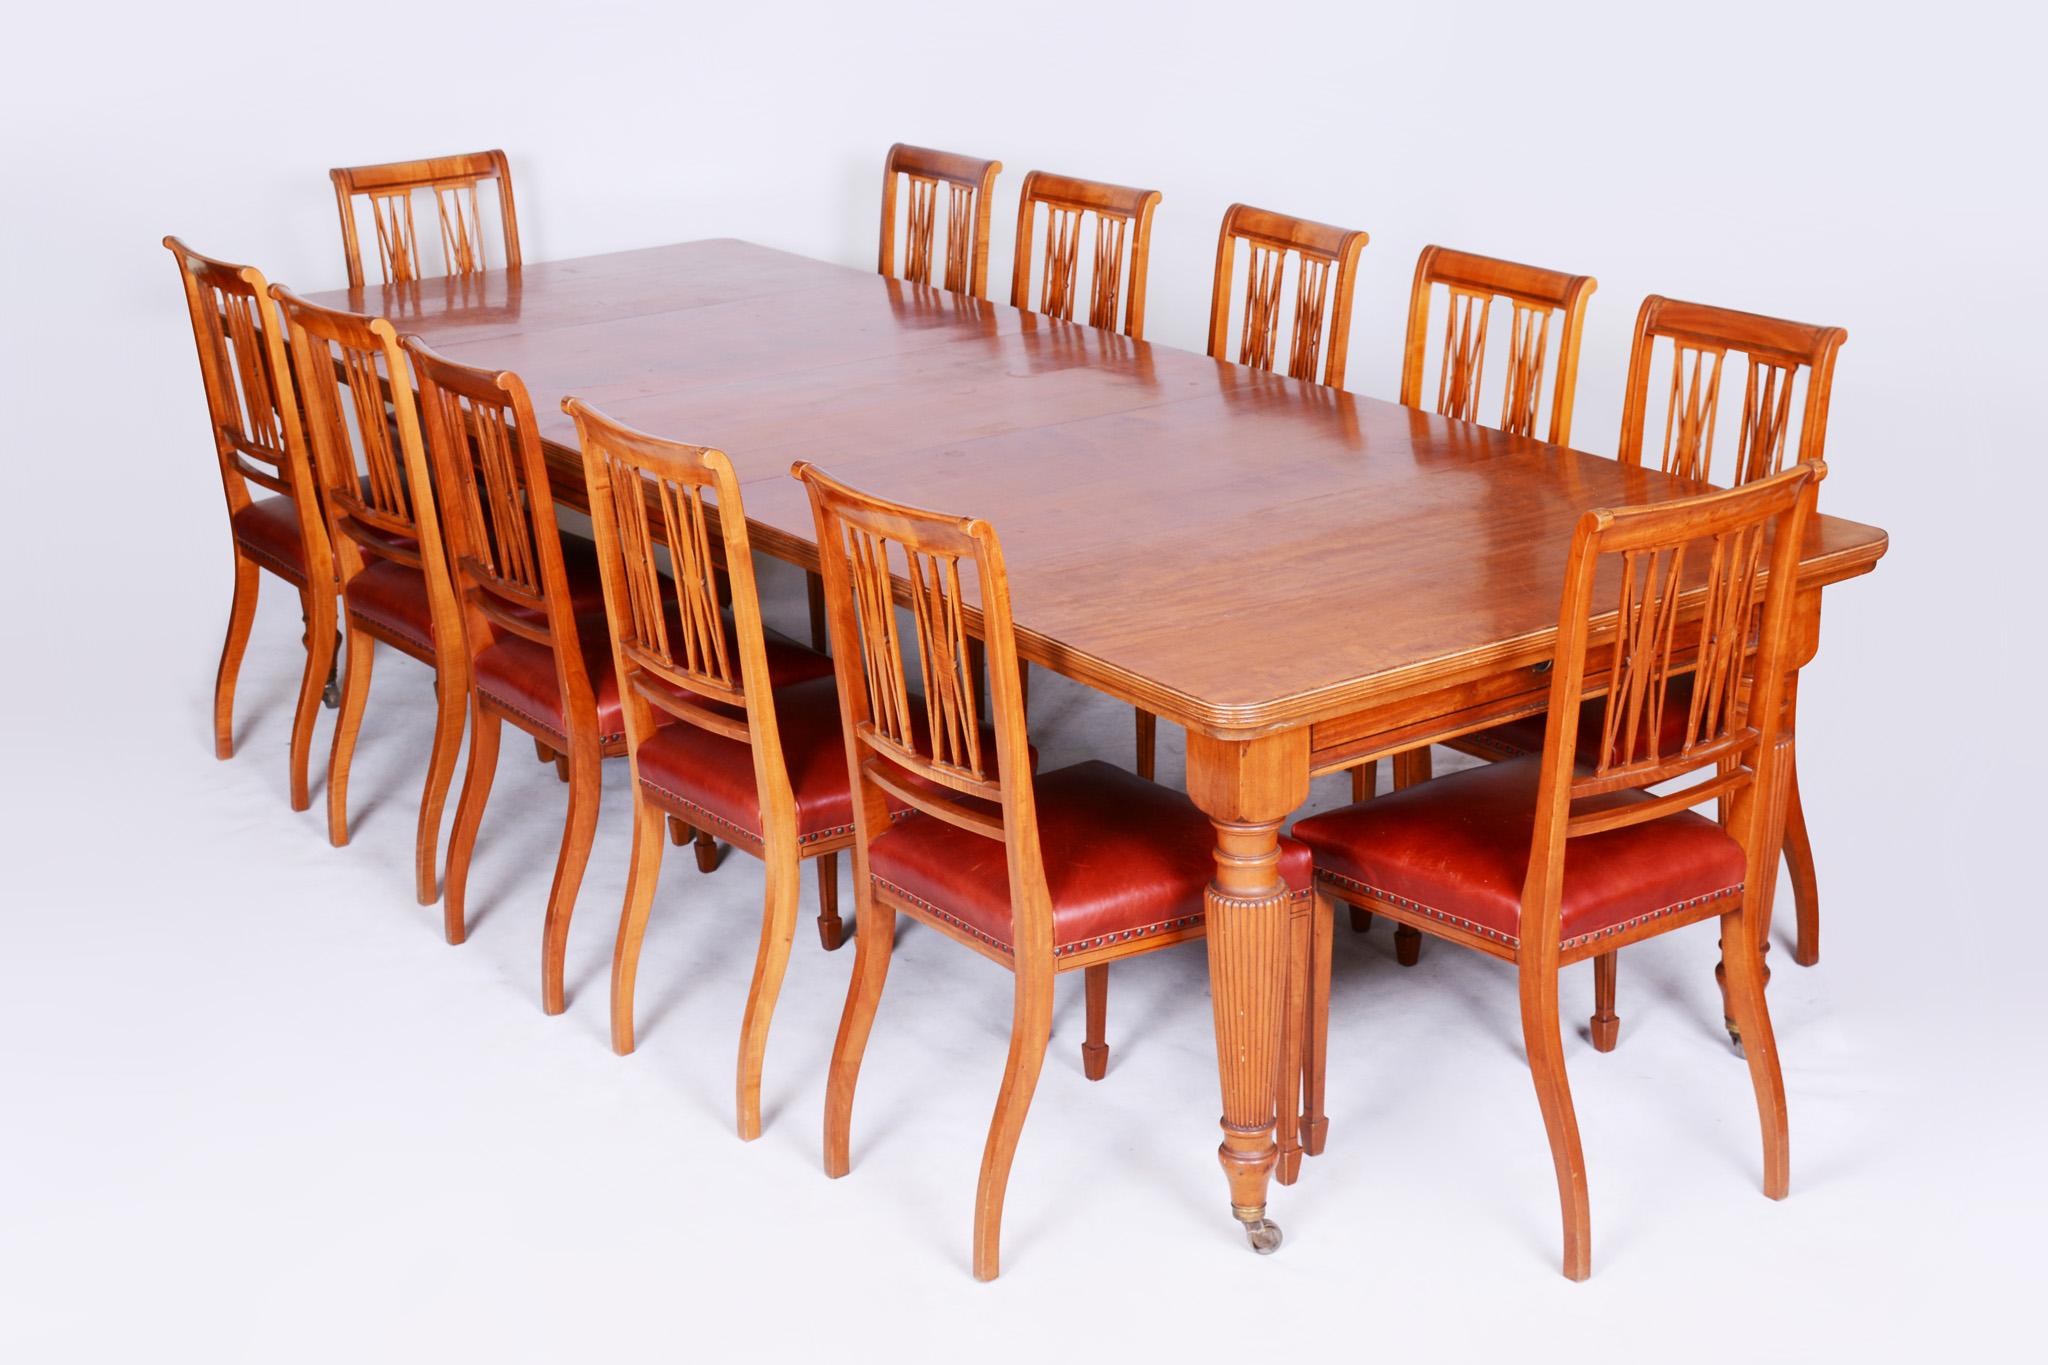 19th Century Original Rare British Dinning Room Set with 12 Chairs, Satin Wood For Sale 3